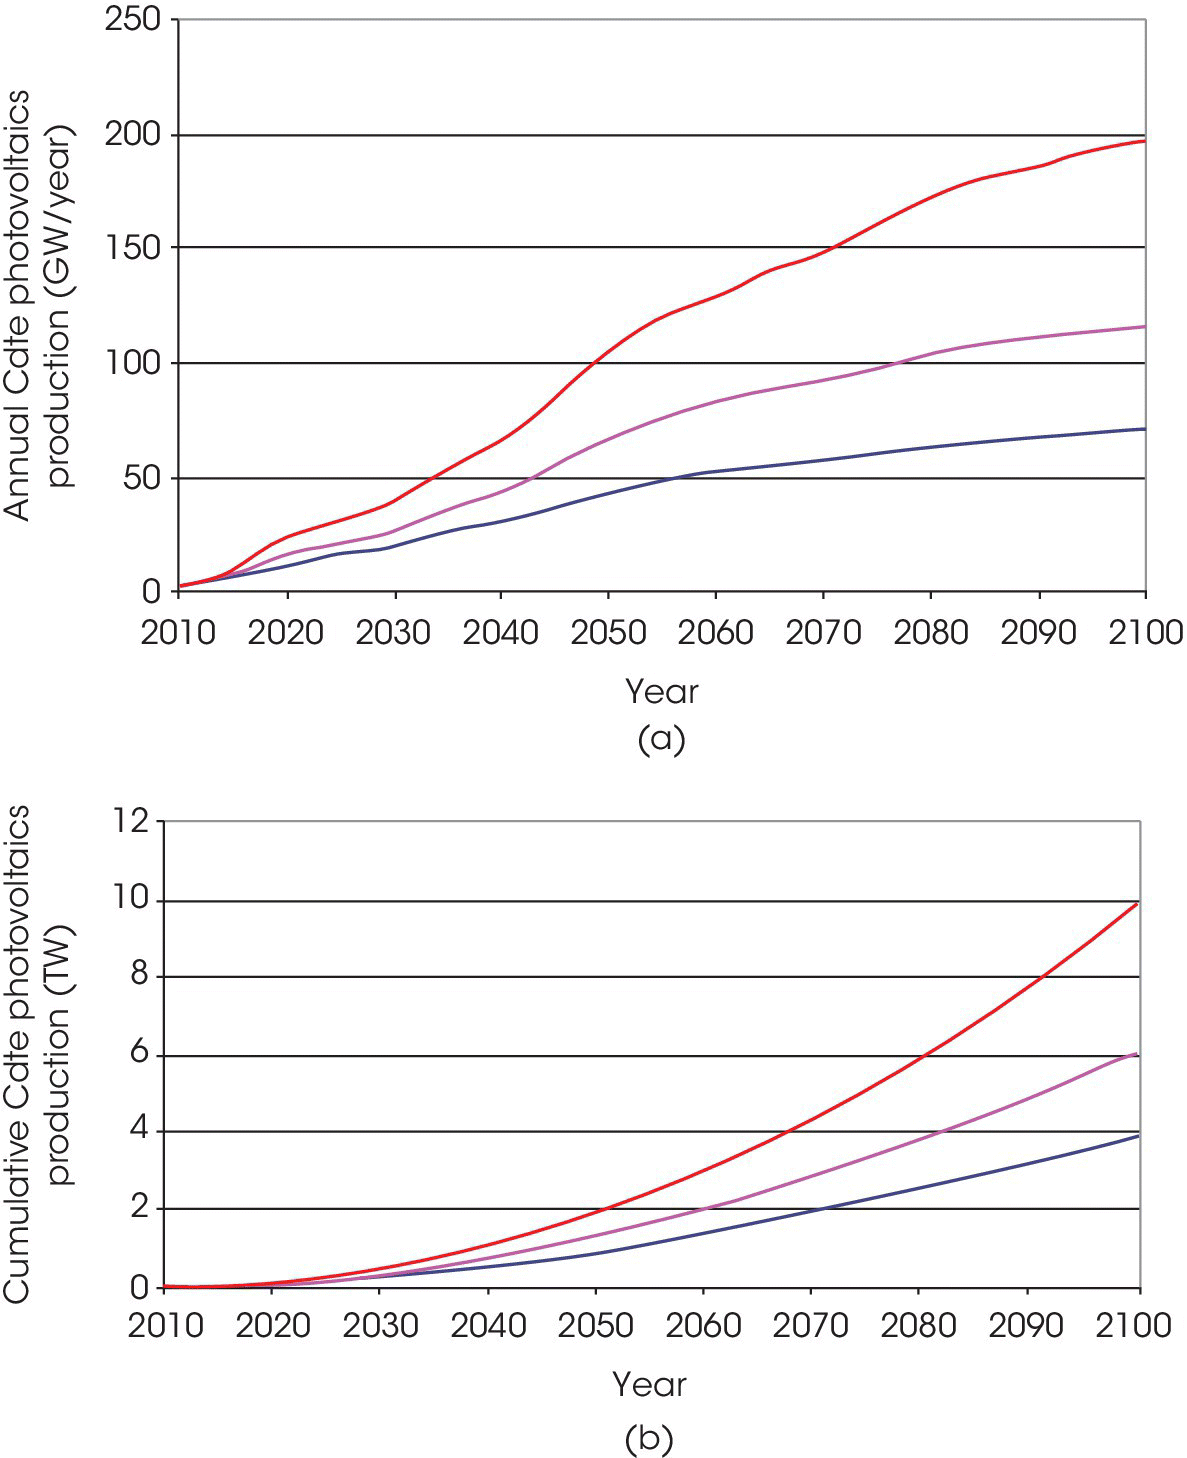 2 Graphs of annual Cdte photovoltaics production (top) and cumulative Cdte photovoltaics production (bottom) vs. year, each displaying 3 ascending curves.